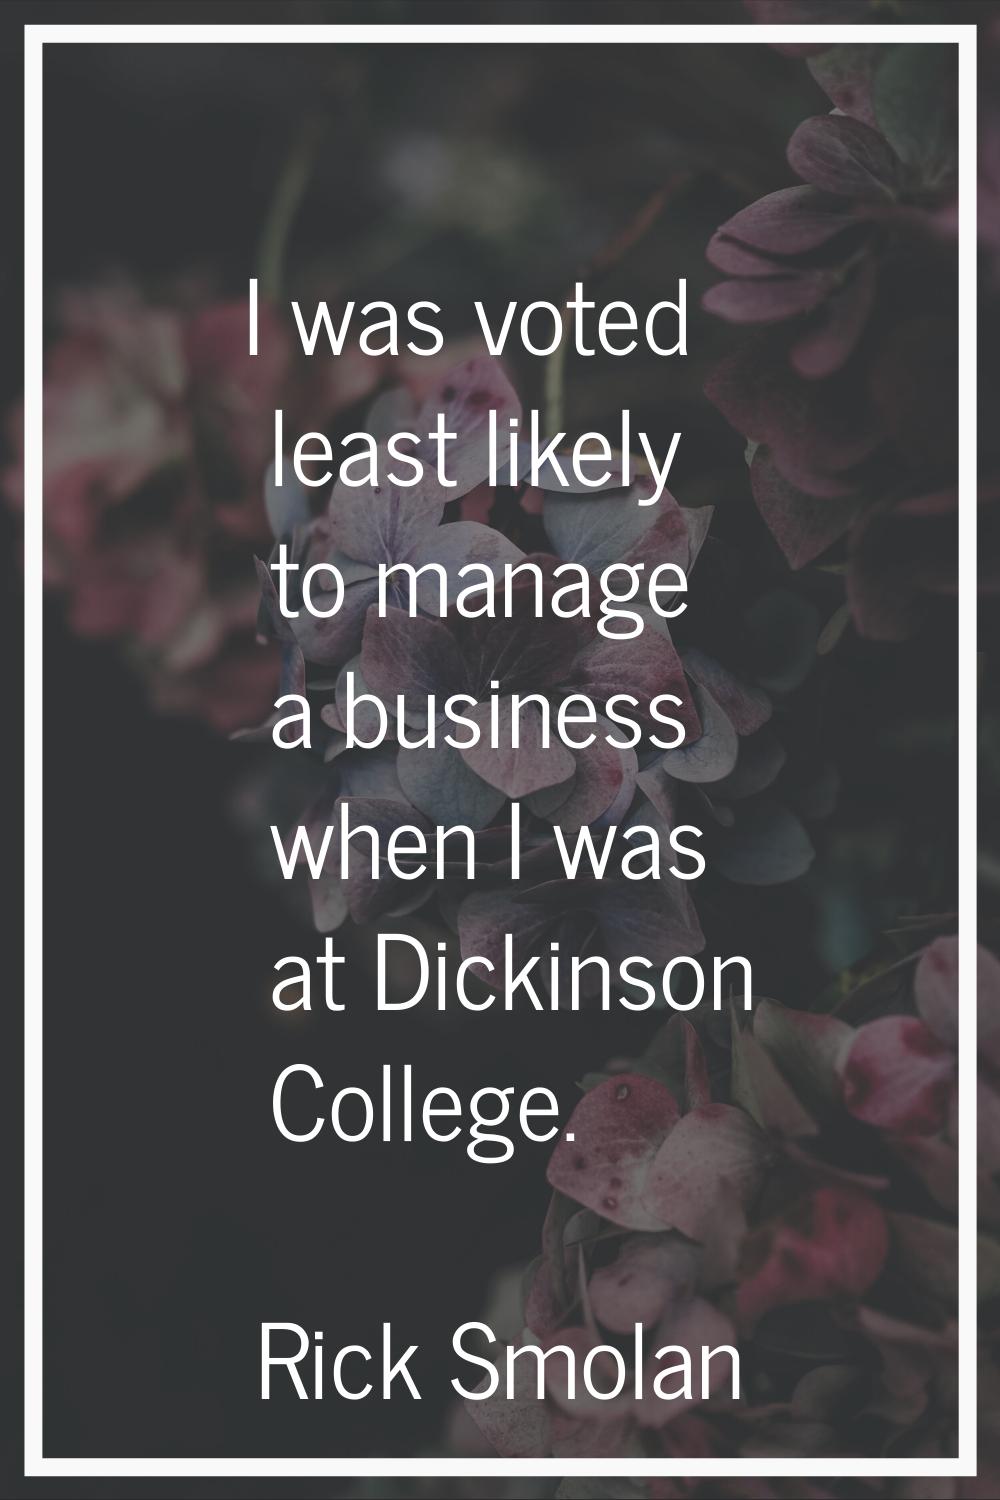 I was voted least likely to manage a business when I was at Dickinson College.